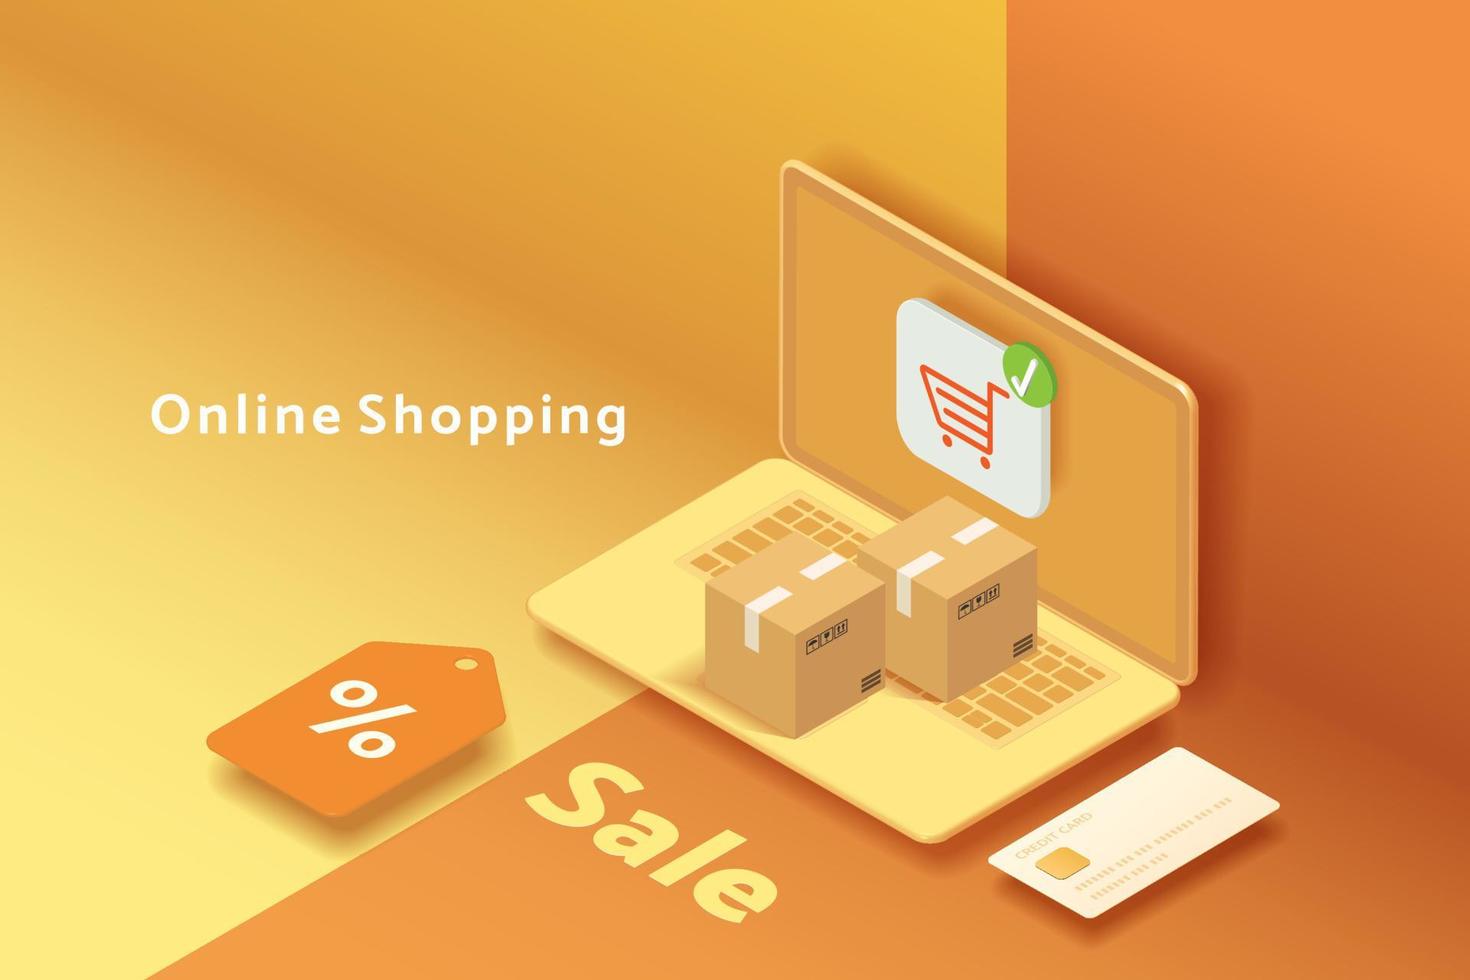 Online shopping via laptop on yellow and orange background. vector